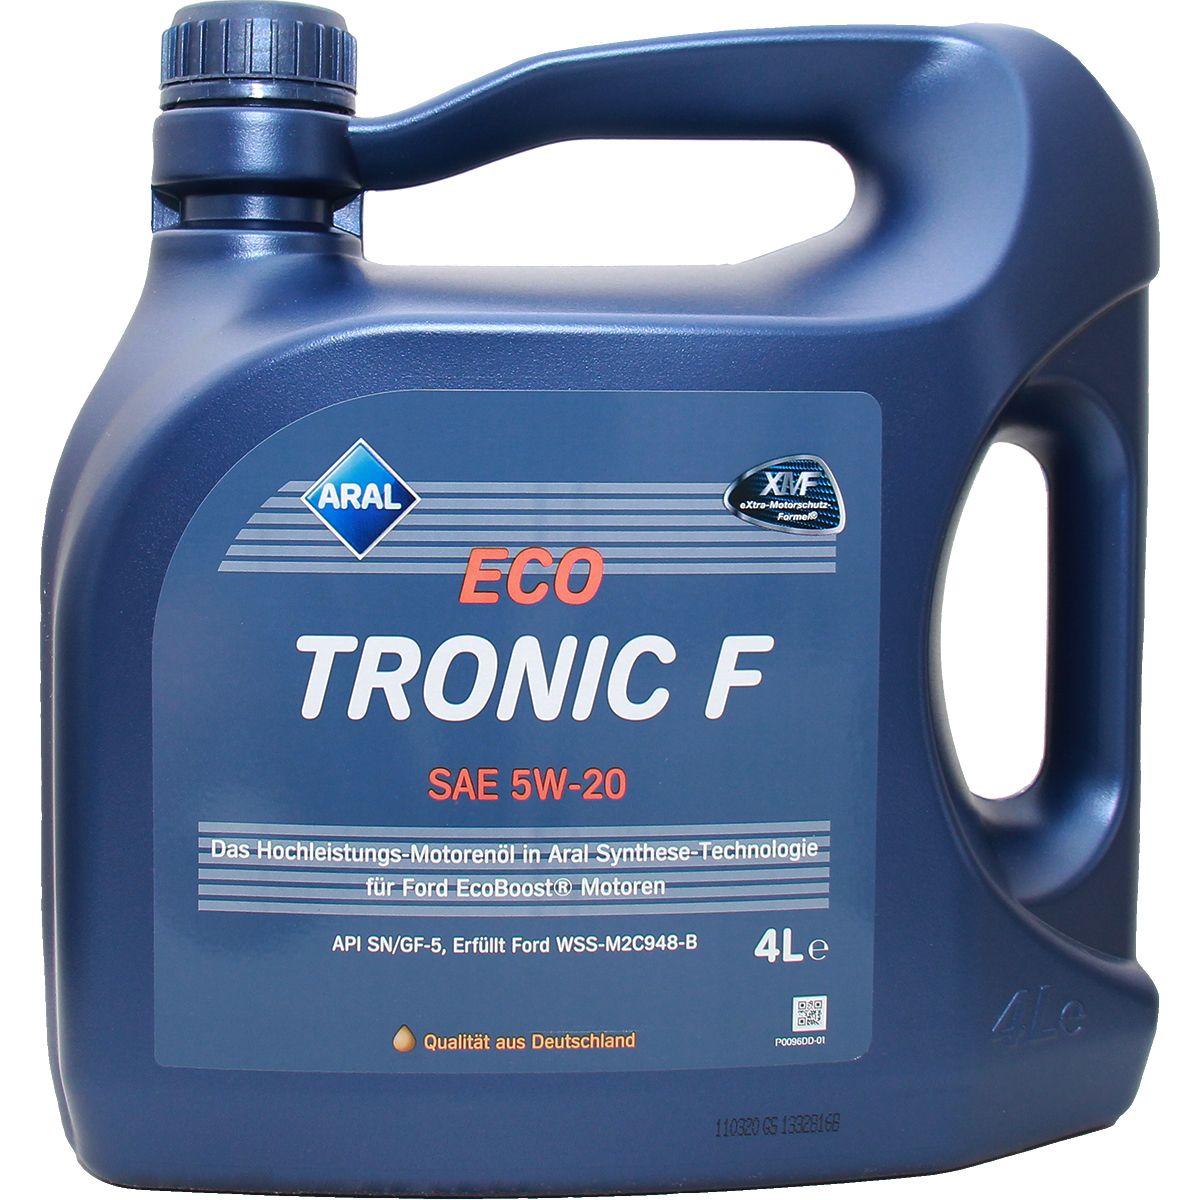 Aral EcoTronic F 5W-20 4 Liter